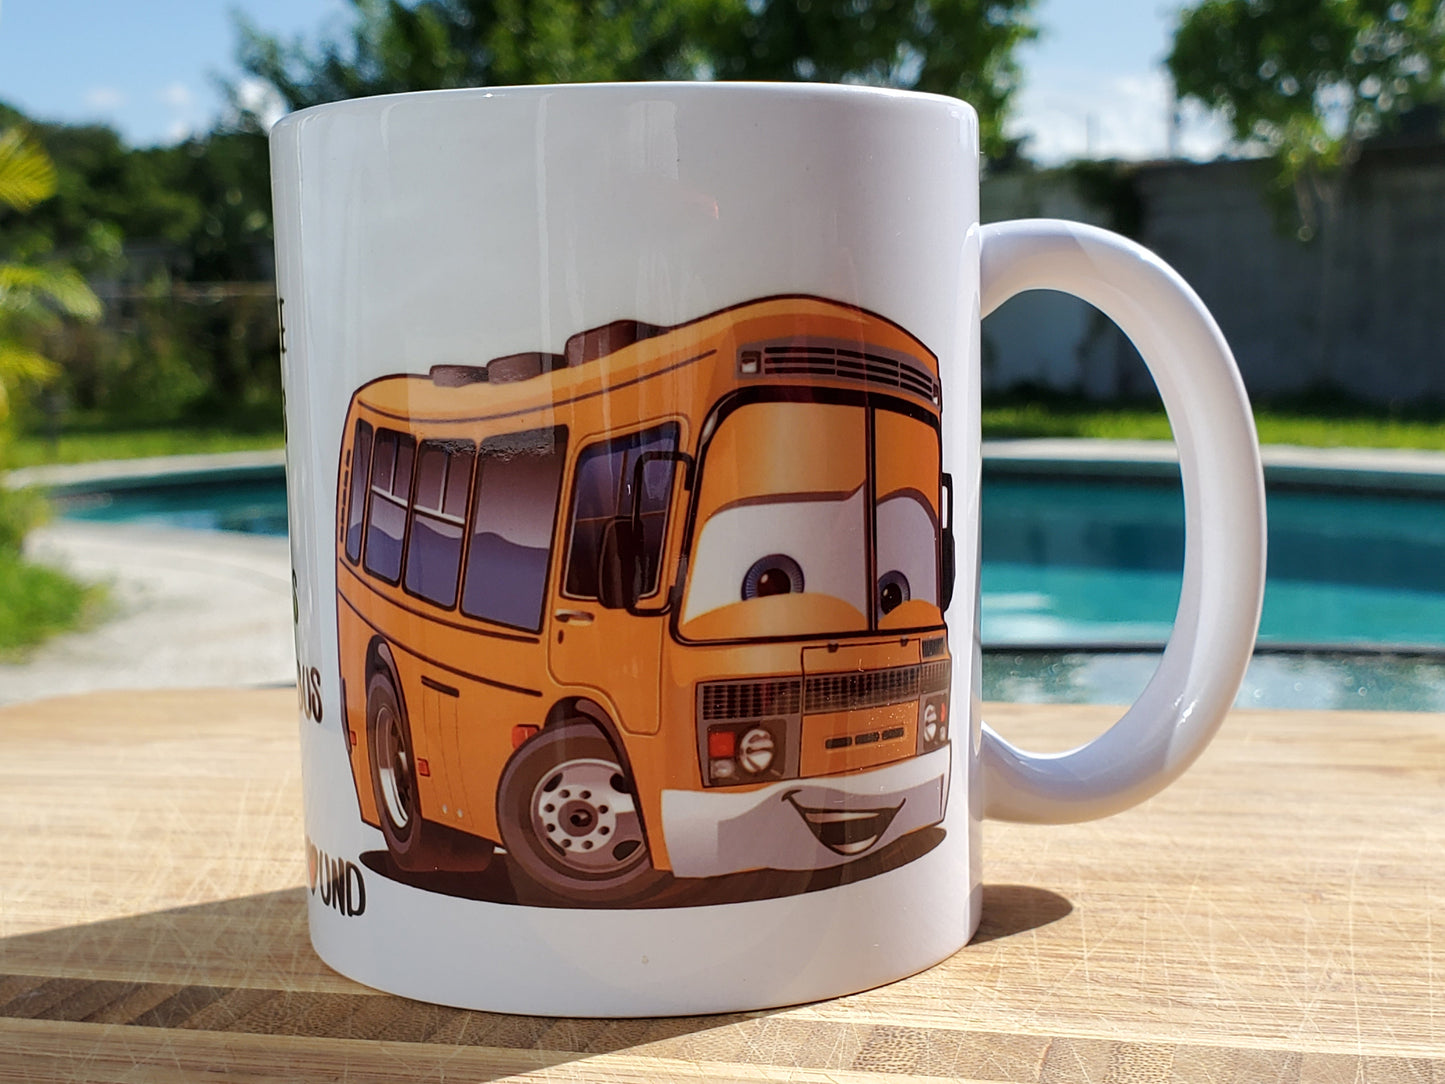 Custom Printed 11 ounce Coffee Mug Makes The Wheels On The Bus Go Round. Crisp Print that can be personalized. Great Way To Start a Day